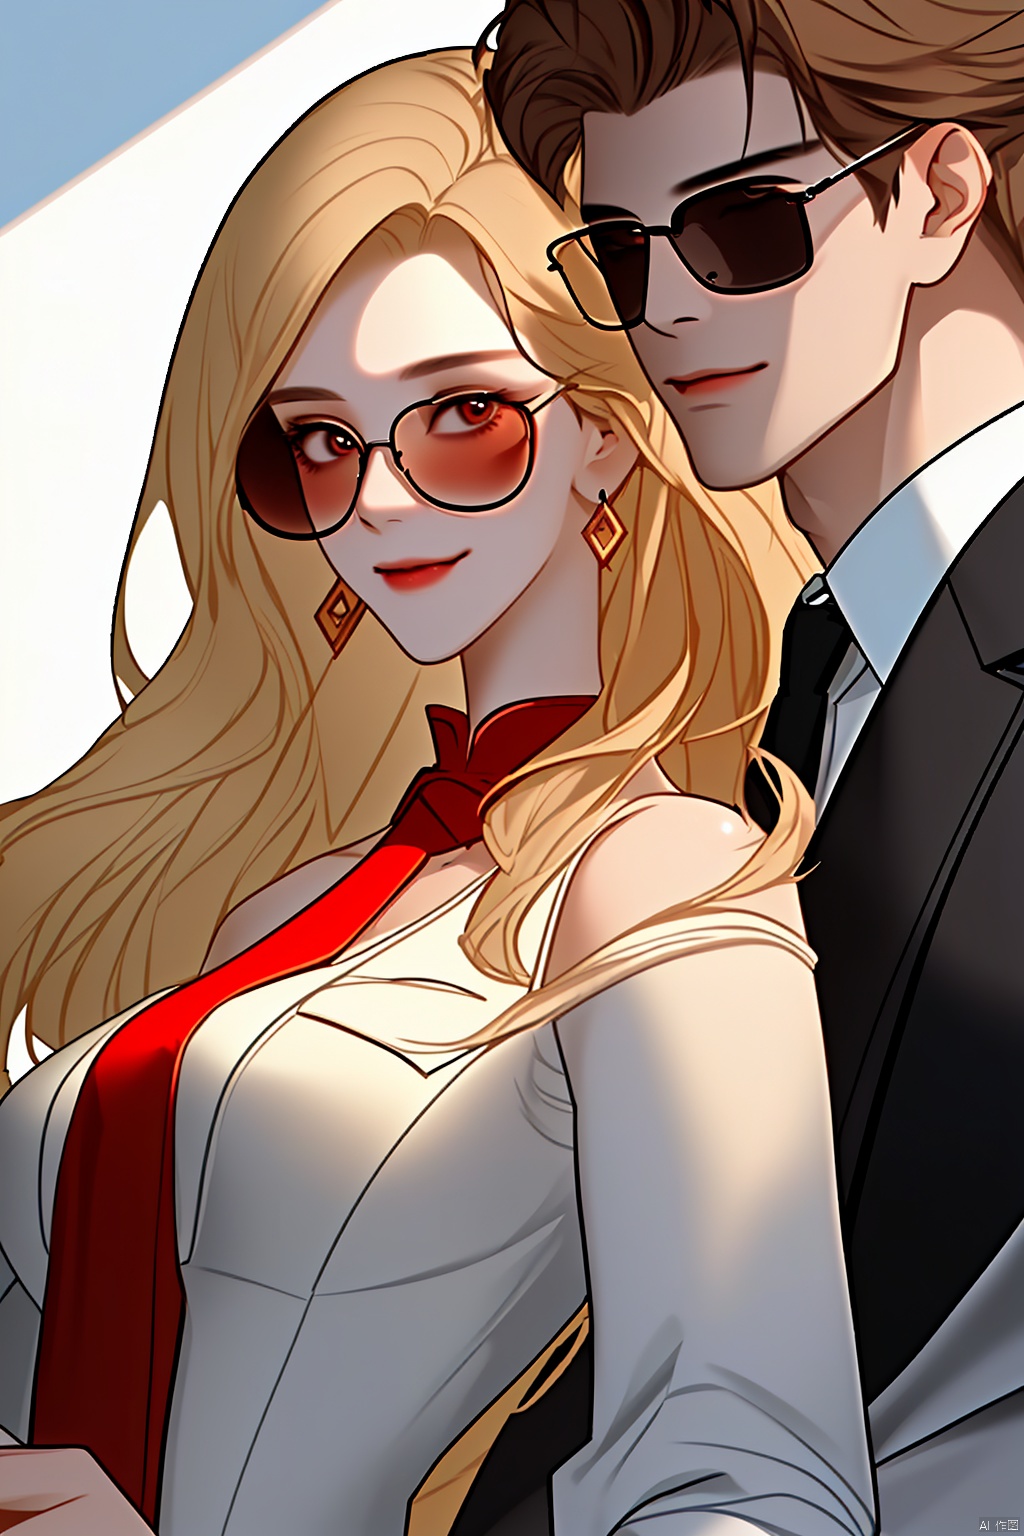  (Extremely detailed CG unified 8k wallpaper) (Masterpiece), (Best picture quality), (Ultra detailed), (Best illustration), (Best shadow), (Extremely exquisite and beautiful) ,((1girl:1.2,1boy:1.2)),blonde hair, sunglass, pocket, white suits, red tie, smile, anger, look at viewer, rounded shoulders, woman